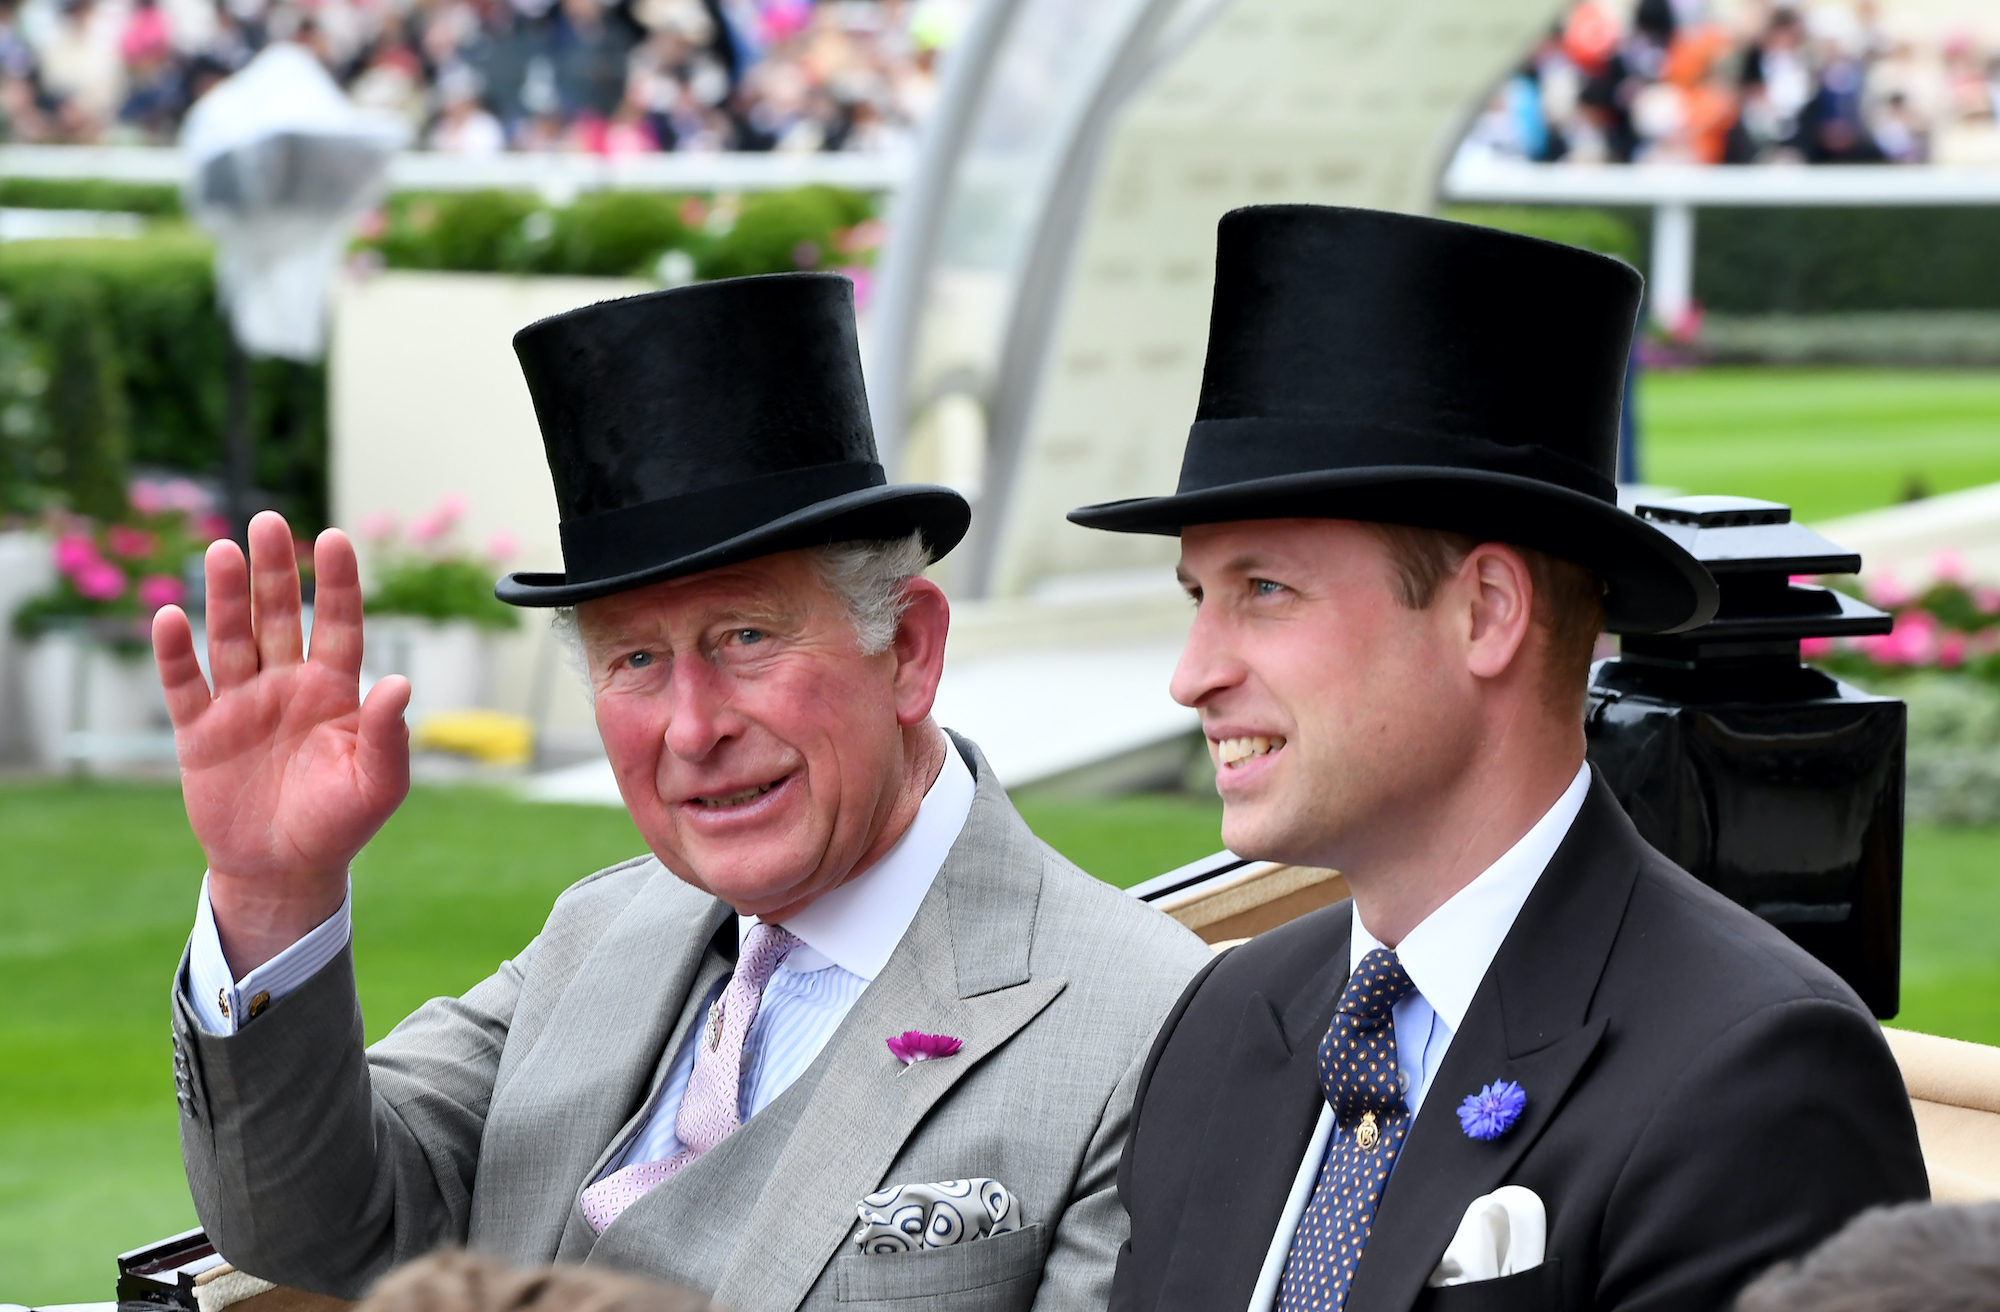 (L-R) Prince Charles waving and Prince William